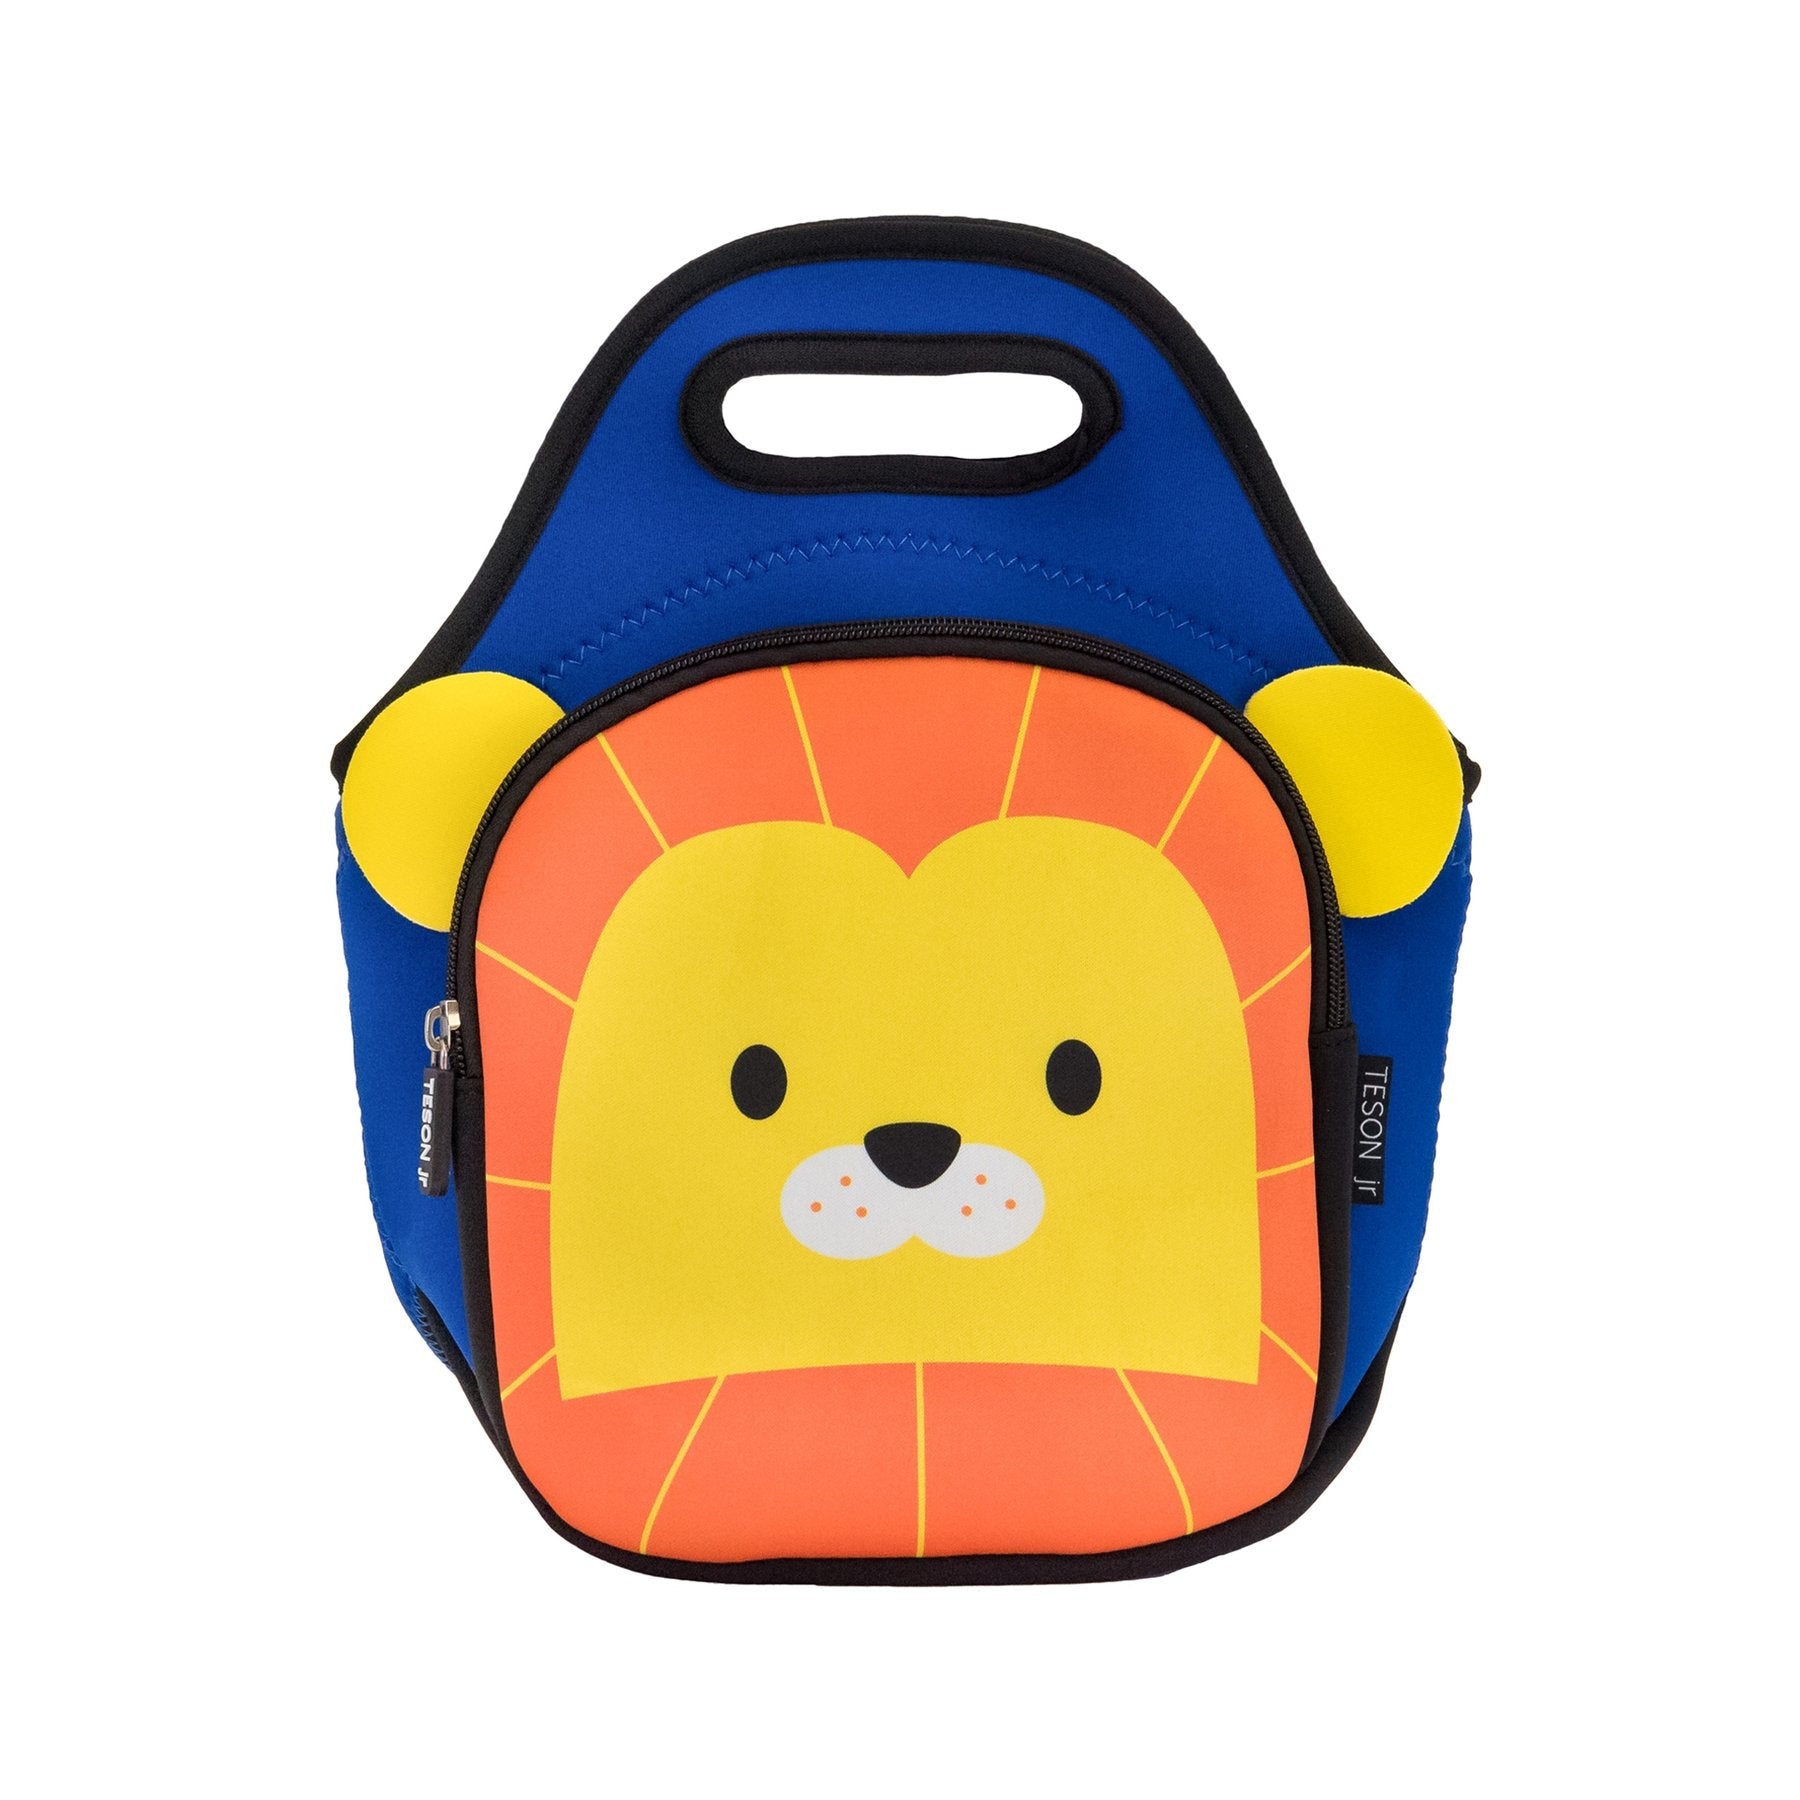 Childrens insulated lion lunch bag/box. Suitable for daycare, preschool, prep, school. Found at Tantrika Australia.